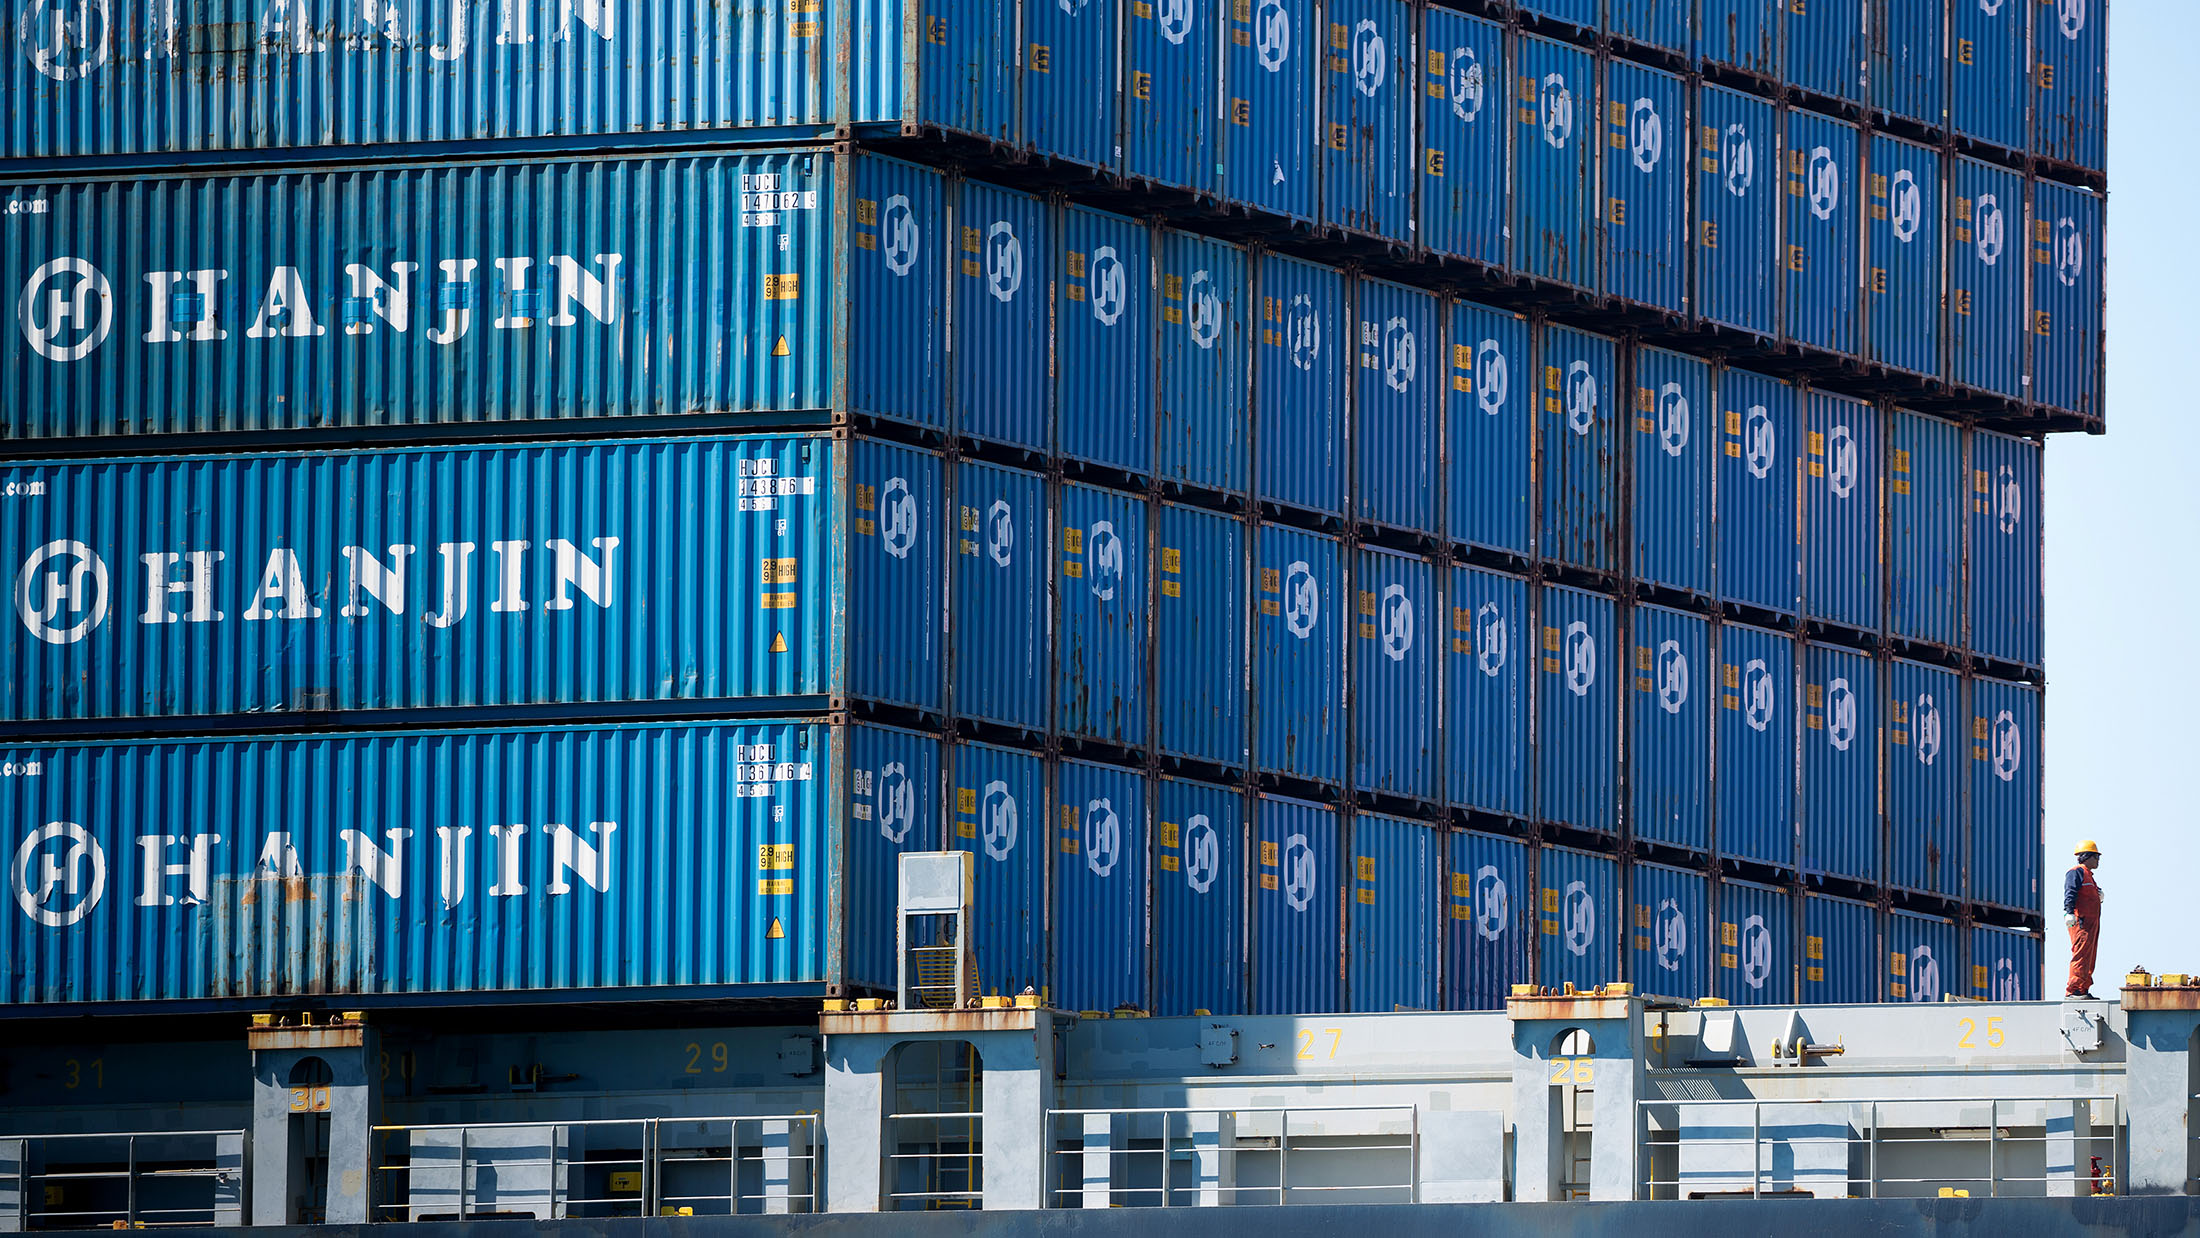 A worker stands as containers sit stacked on the Hanjin Gdynia cargo ship berthed at the Port of Long Beach in Long Beach, California, U.S., on Thursday, Sept. 15, 2016. Bankrupt Hanjin Shipping Co.'s efforts to unload vessels in the U.S. while it goes through bankruptcy in South Korea are meeting with complaints from cargo owners and from the companies that service and equip its fleet.
